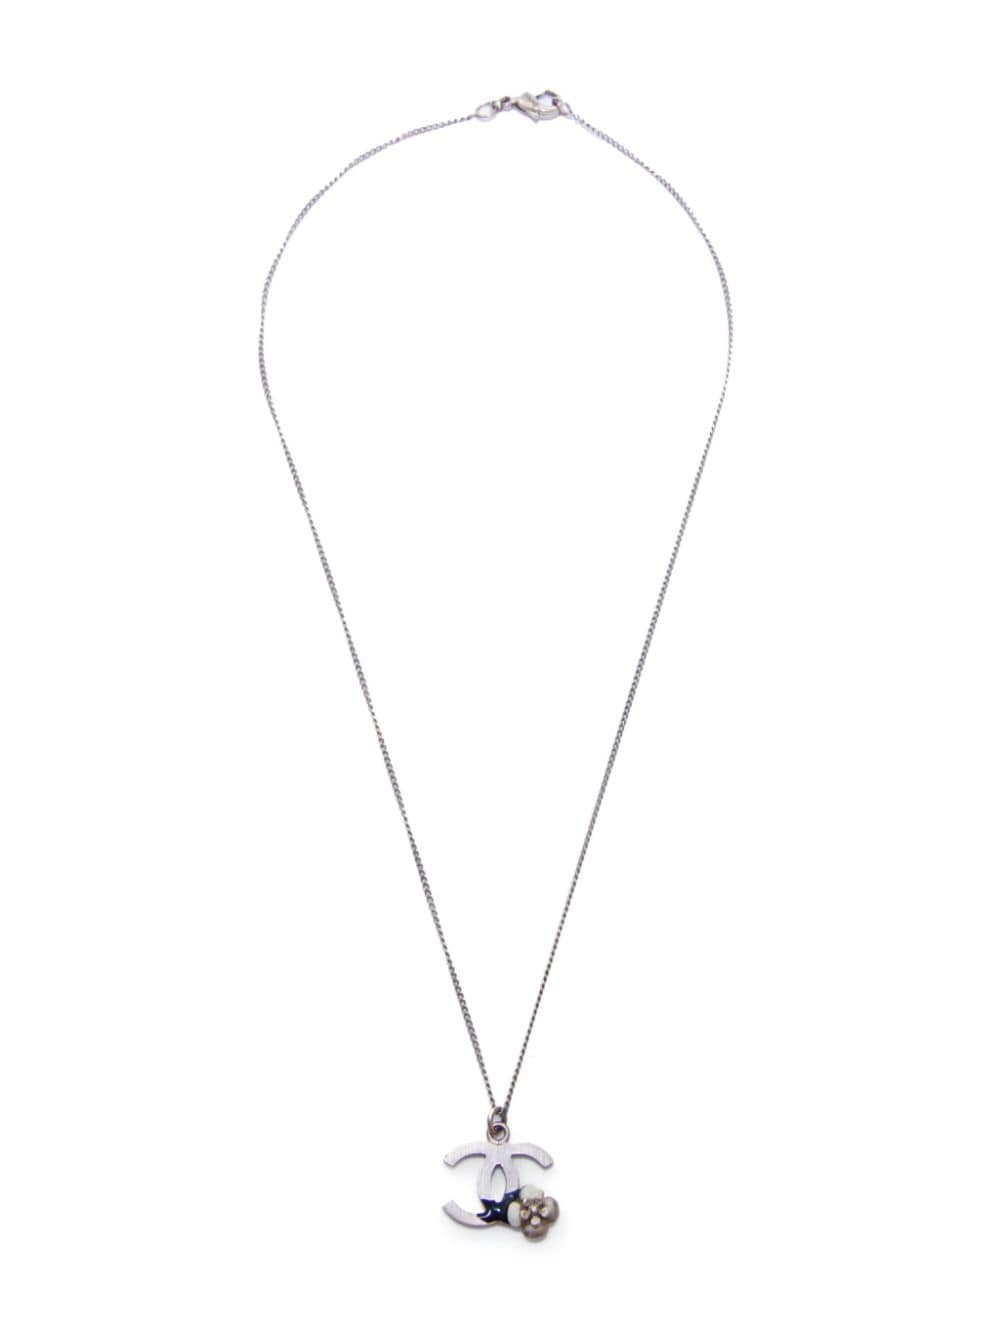 Pre-owned Chanel 2000 Cc Camélia Long Necklace In Silver